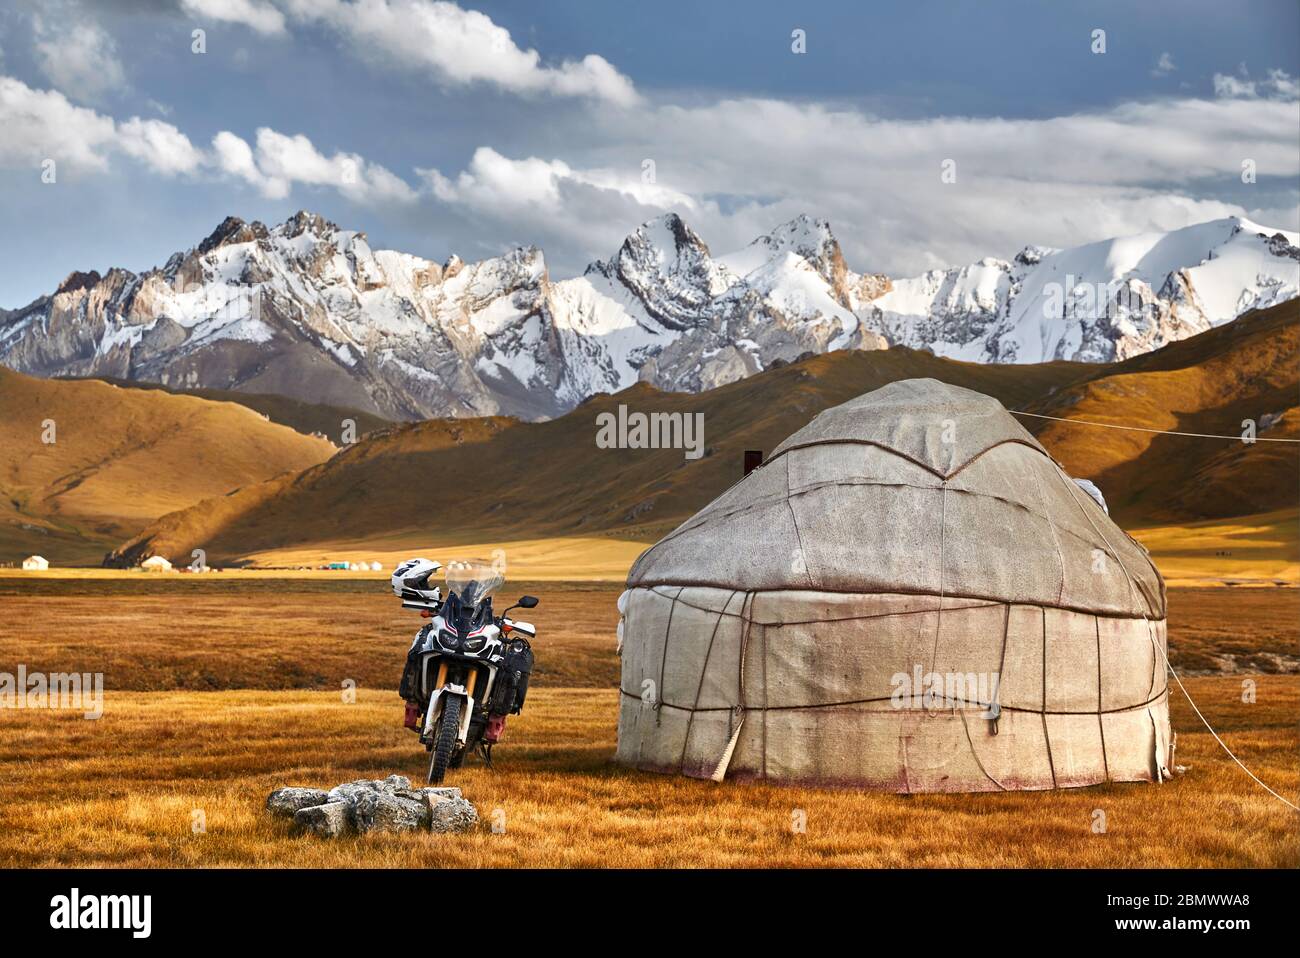 Yurt nomadic houses camp and motorcycle at mountain valley in Central Asia Stock Photo